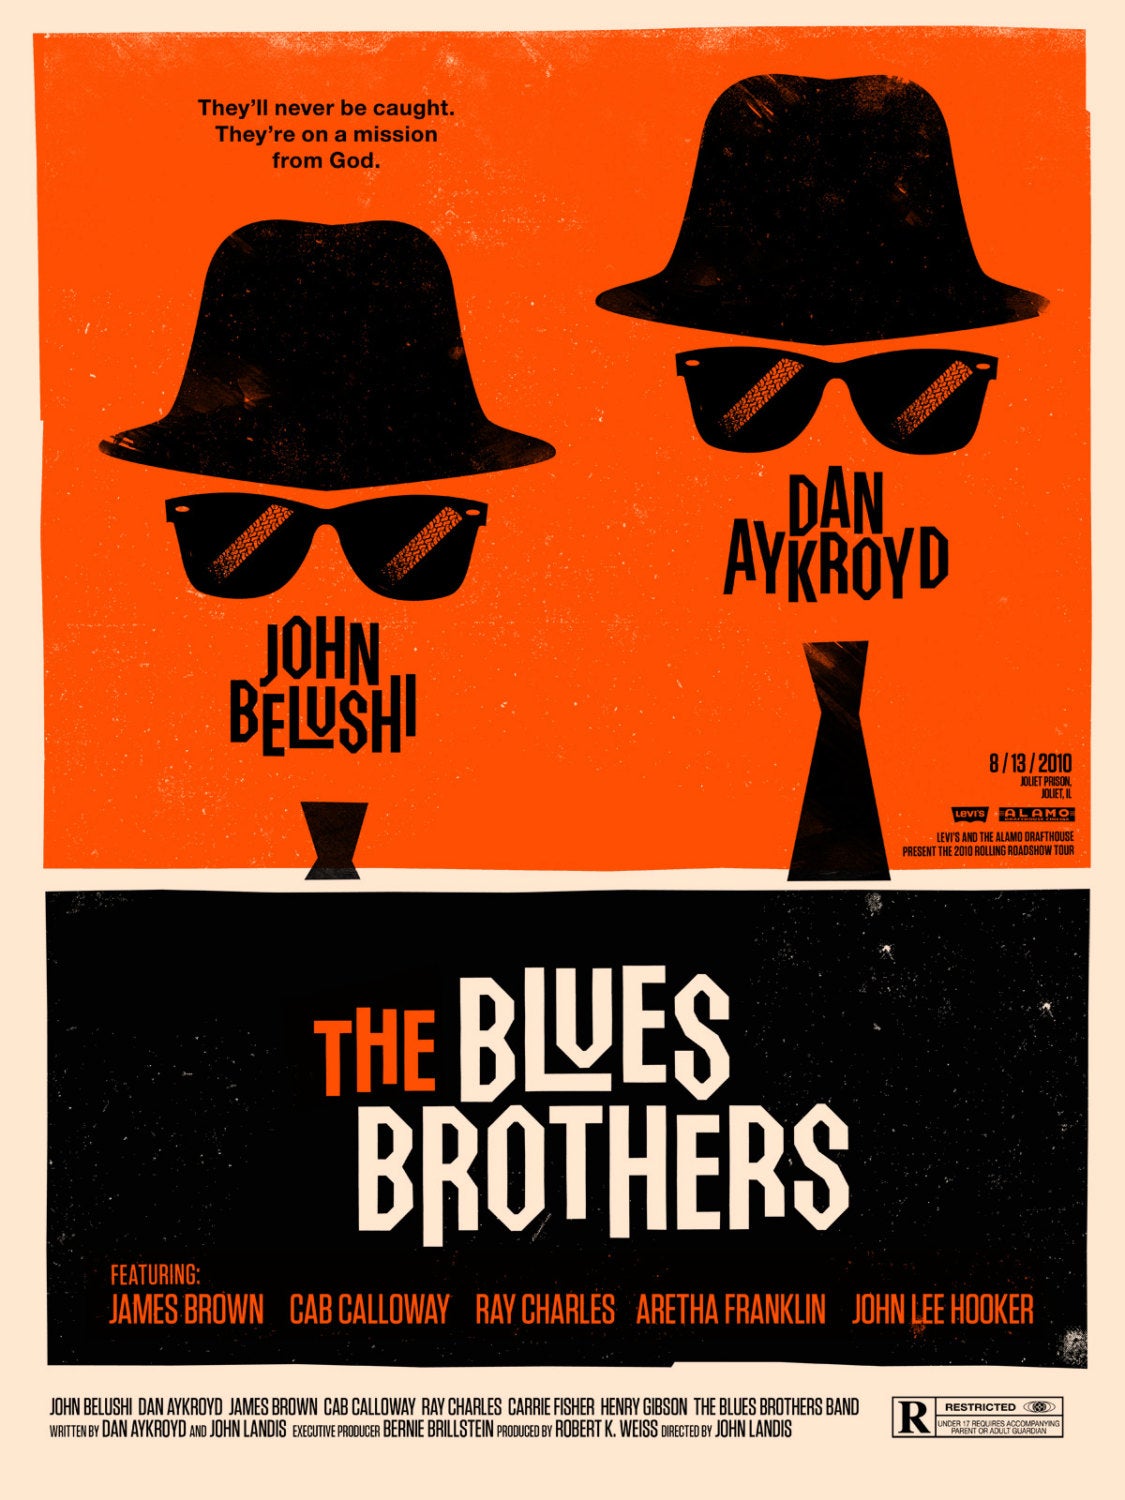 Vintage Music Art Poster - The Blues Brothers 0544